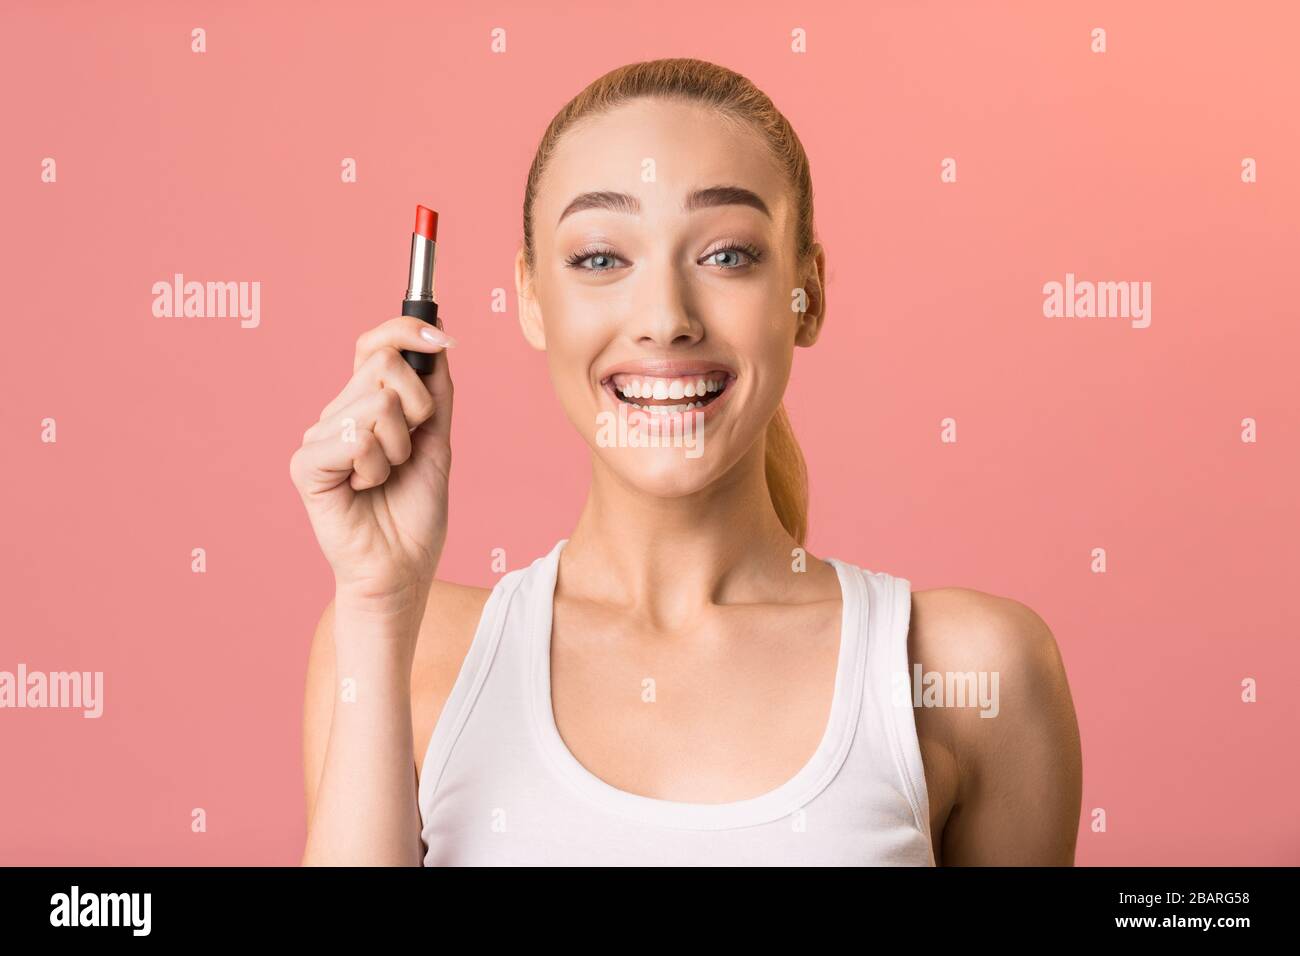 Excited Girl Holding Lipstick Smiling Posing Over Pink Background Stock Photo